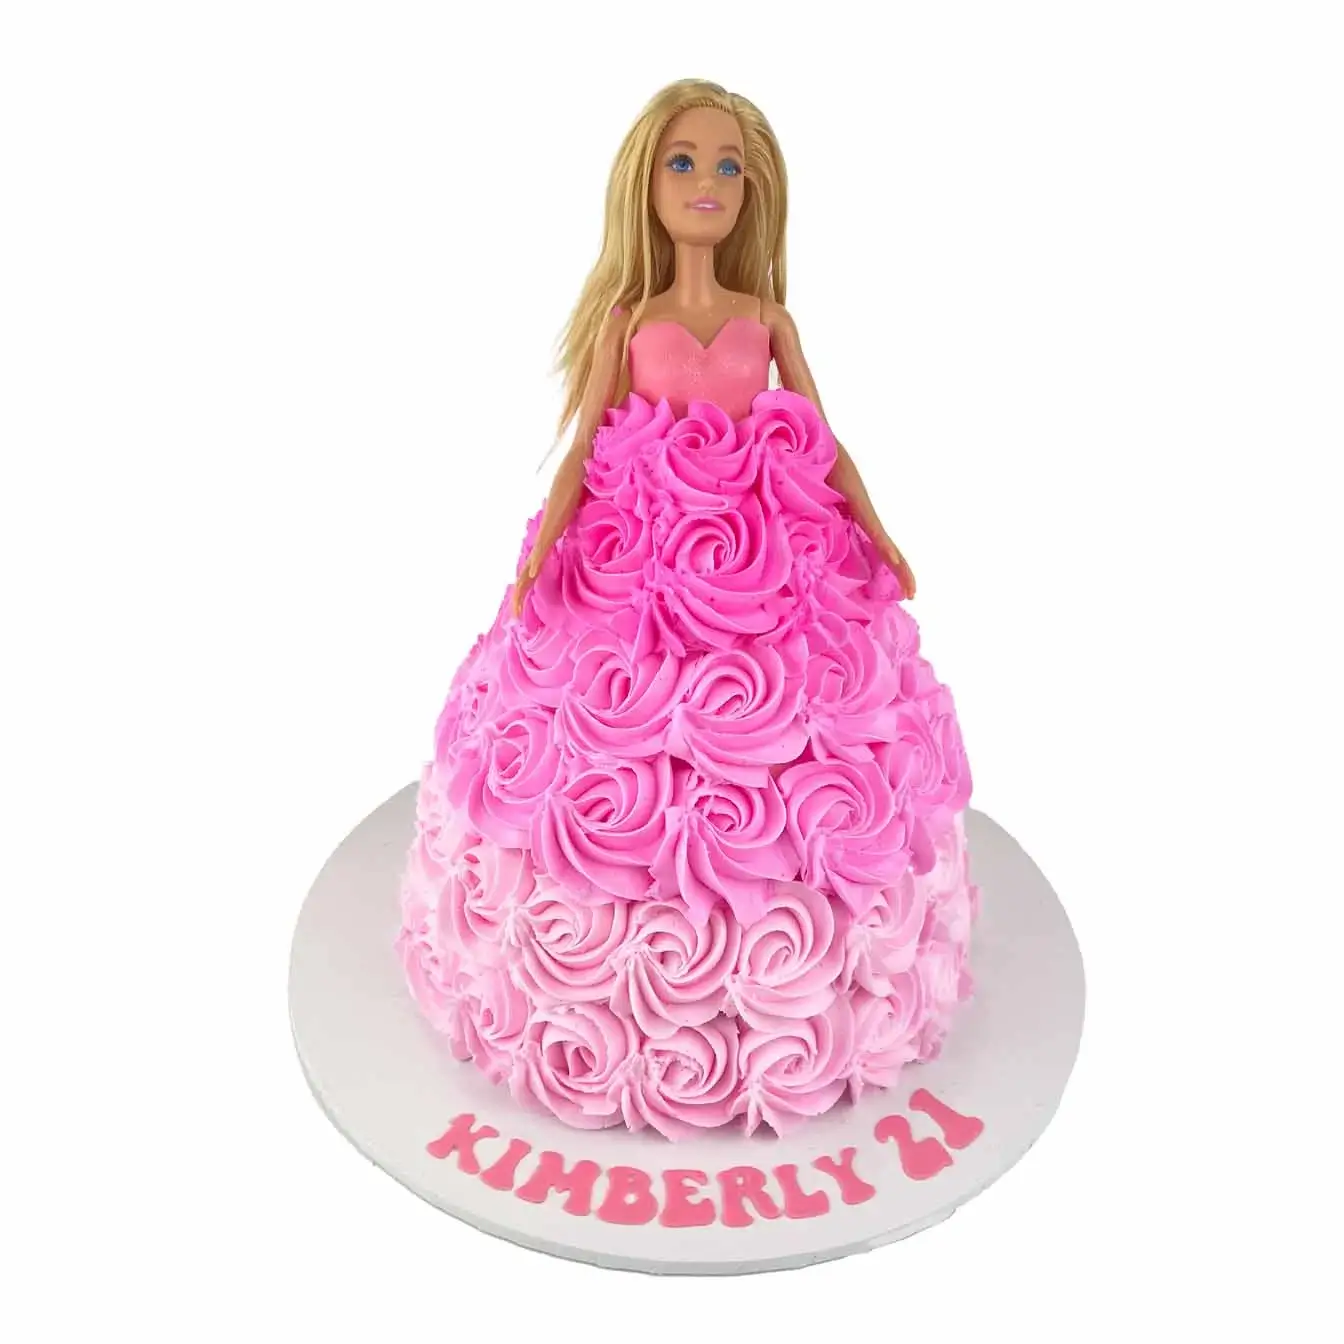 Elegant Rosette Dolly Varden Cake - A classic Dolly Varden shape adorned with meticulously piped rosettes, a timeless centerpiece for weddings, birthdays, and special occasions.